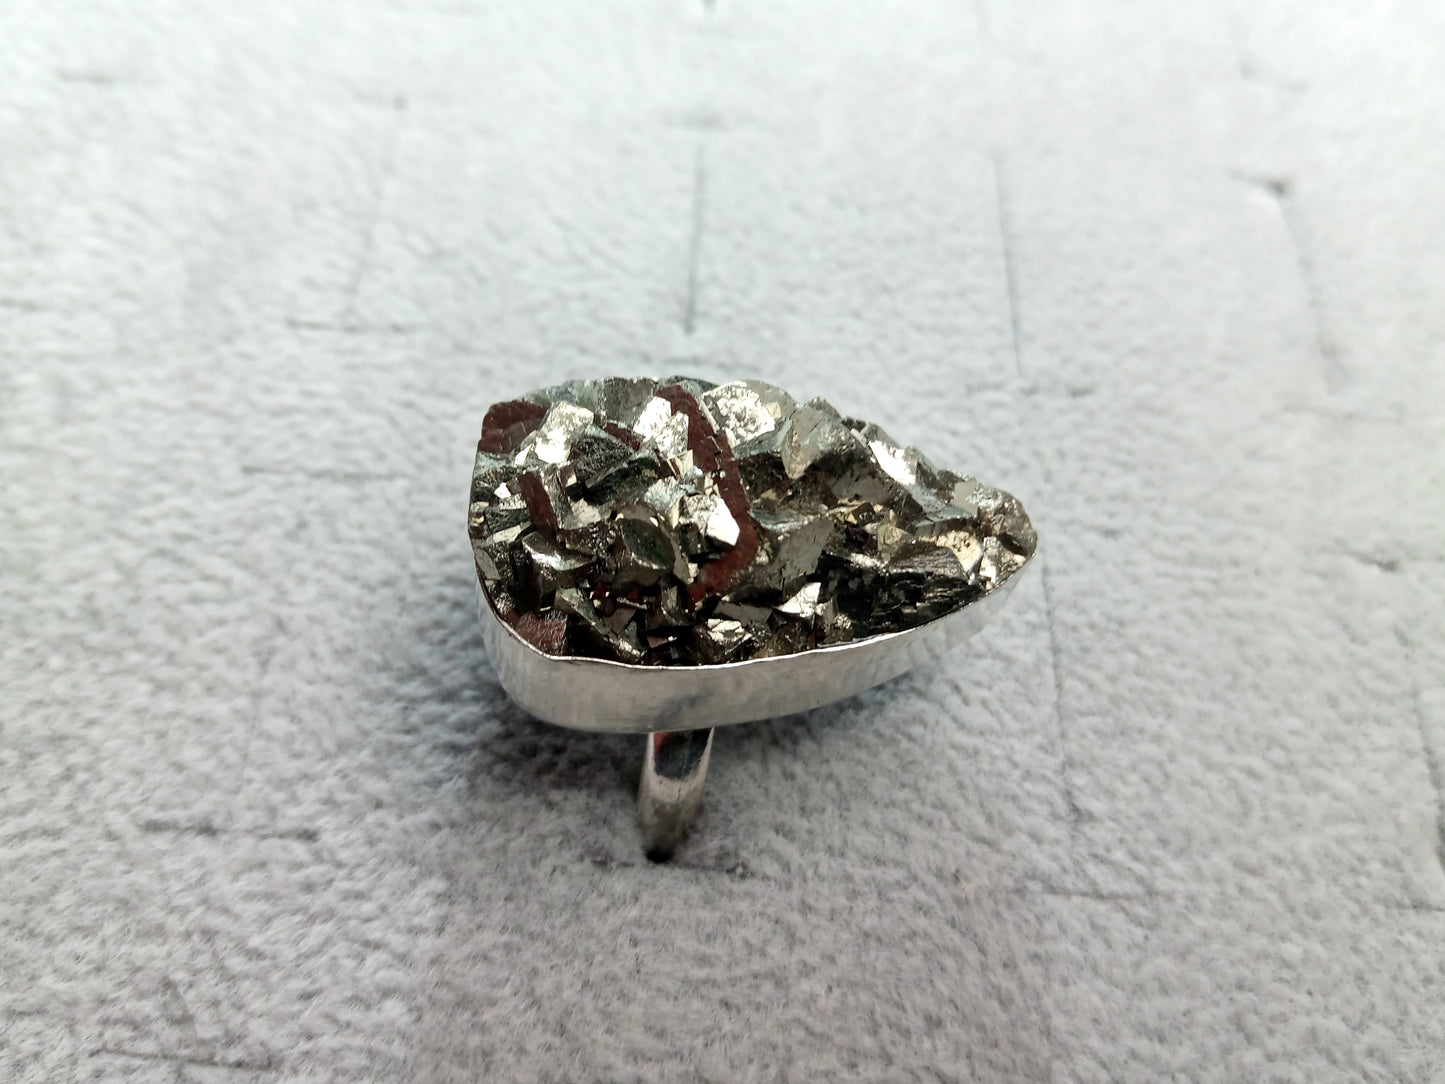 A ring of pyrite